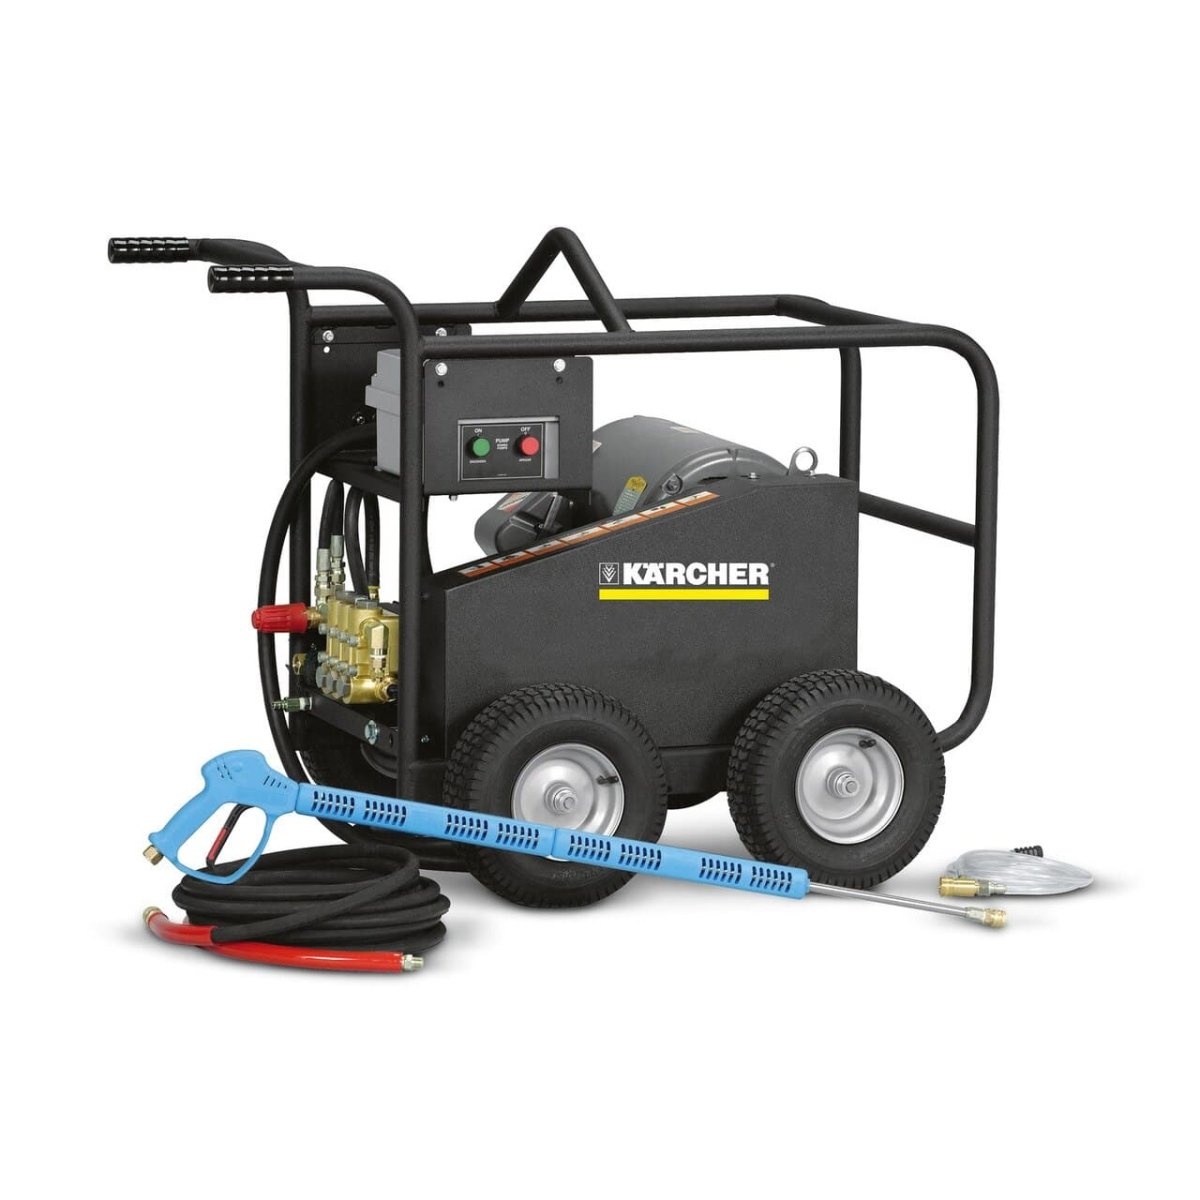 HD Roll Cage 11070840 Commercial Cold Water Pressure Washer - Karcher